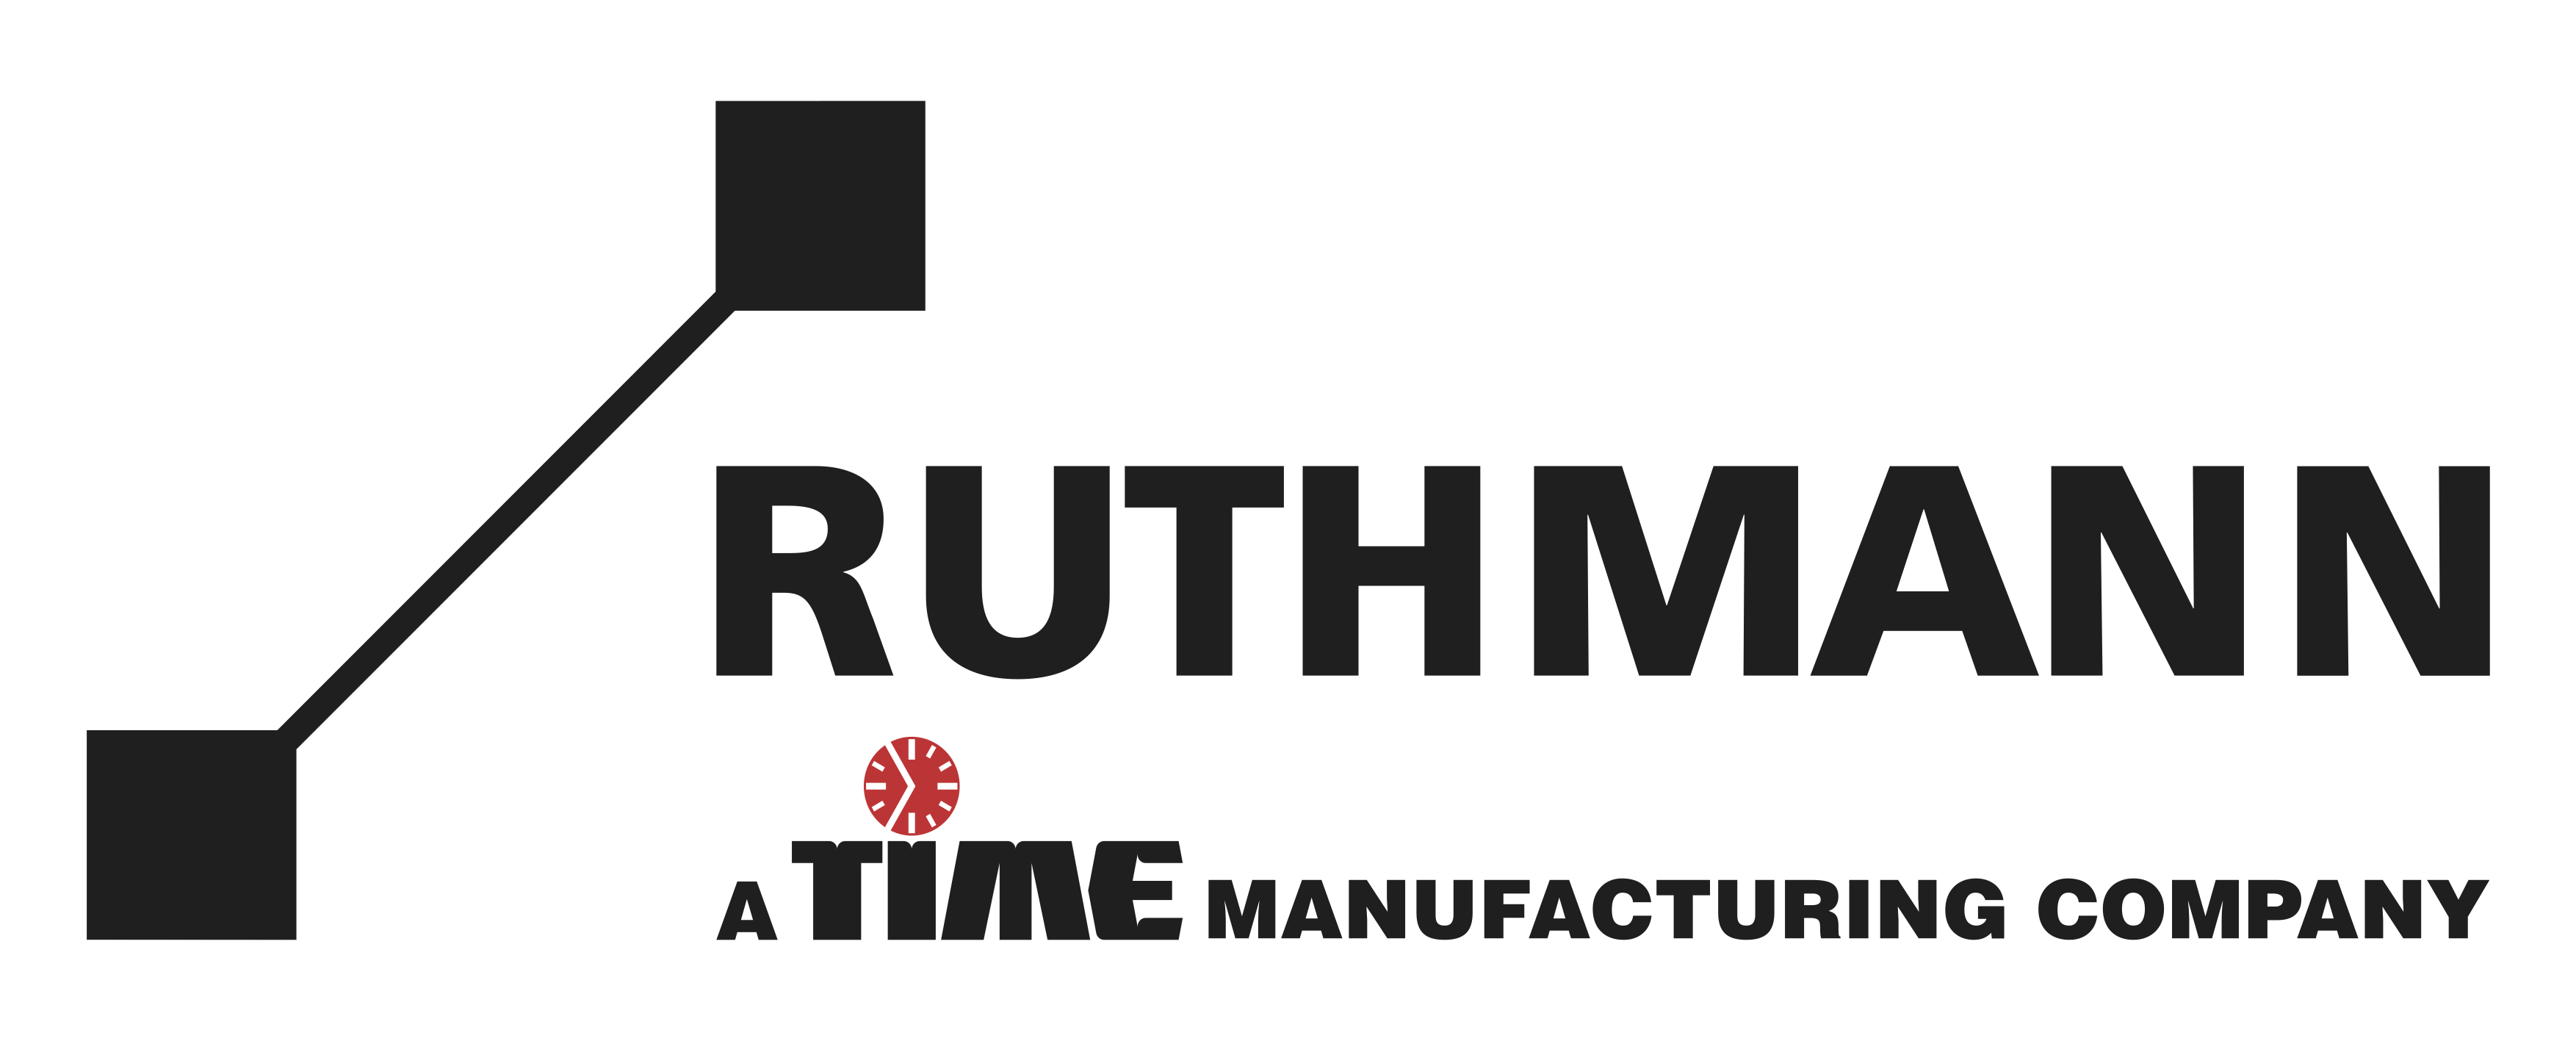 Ruthmann Acquisition Completes as Time Manufacturing Company